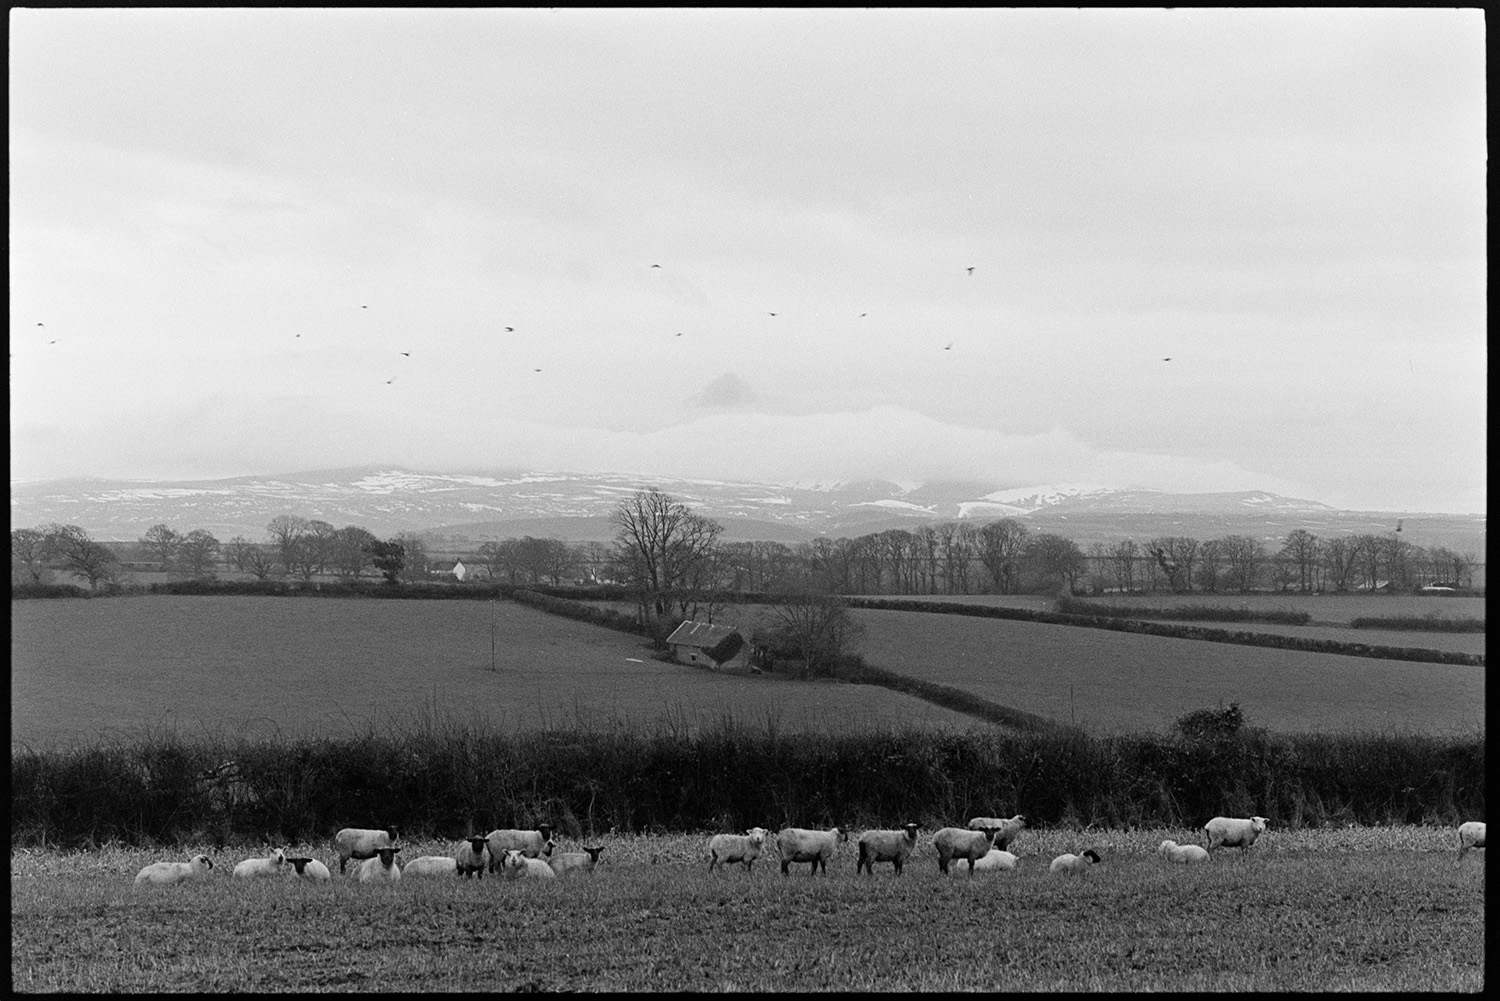 Farmer with flock of sheep, snowy moor in distance, muddy ground.
[Sheep standing in a field at Ingleigh Green with fields, trees, a barn and snow covered hills visible in the distance.]